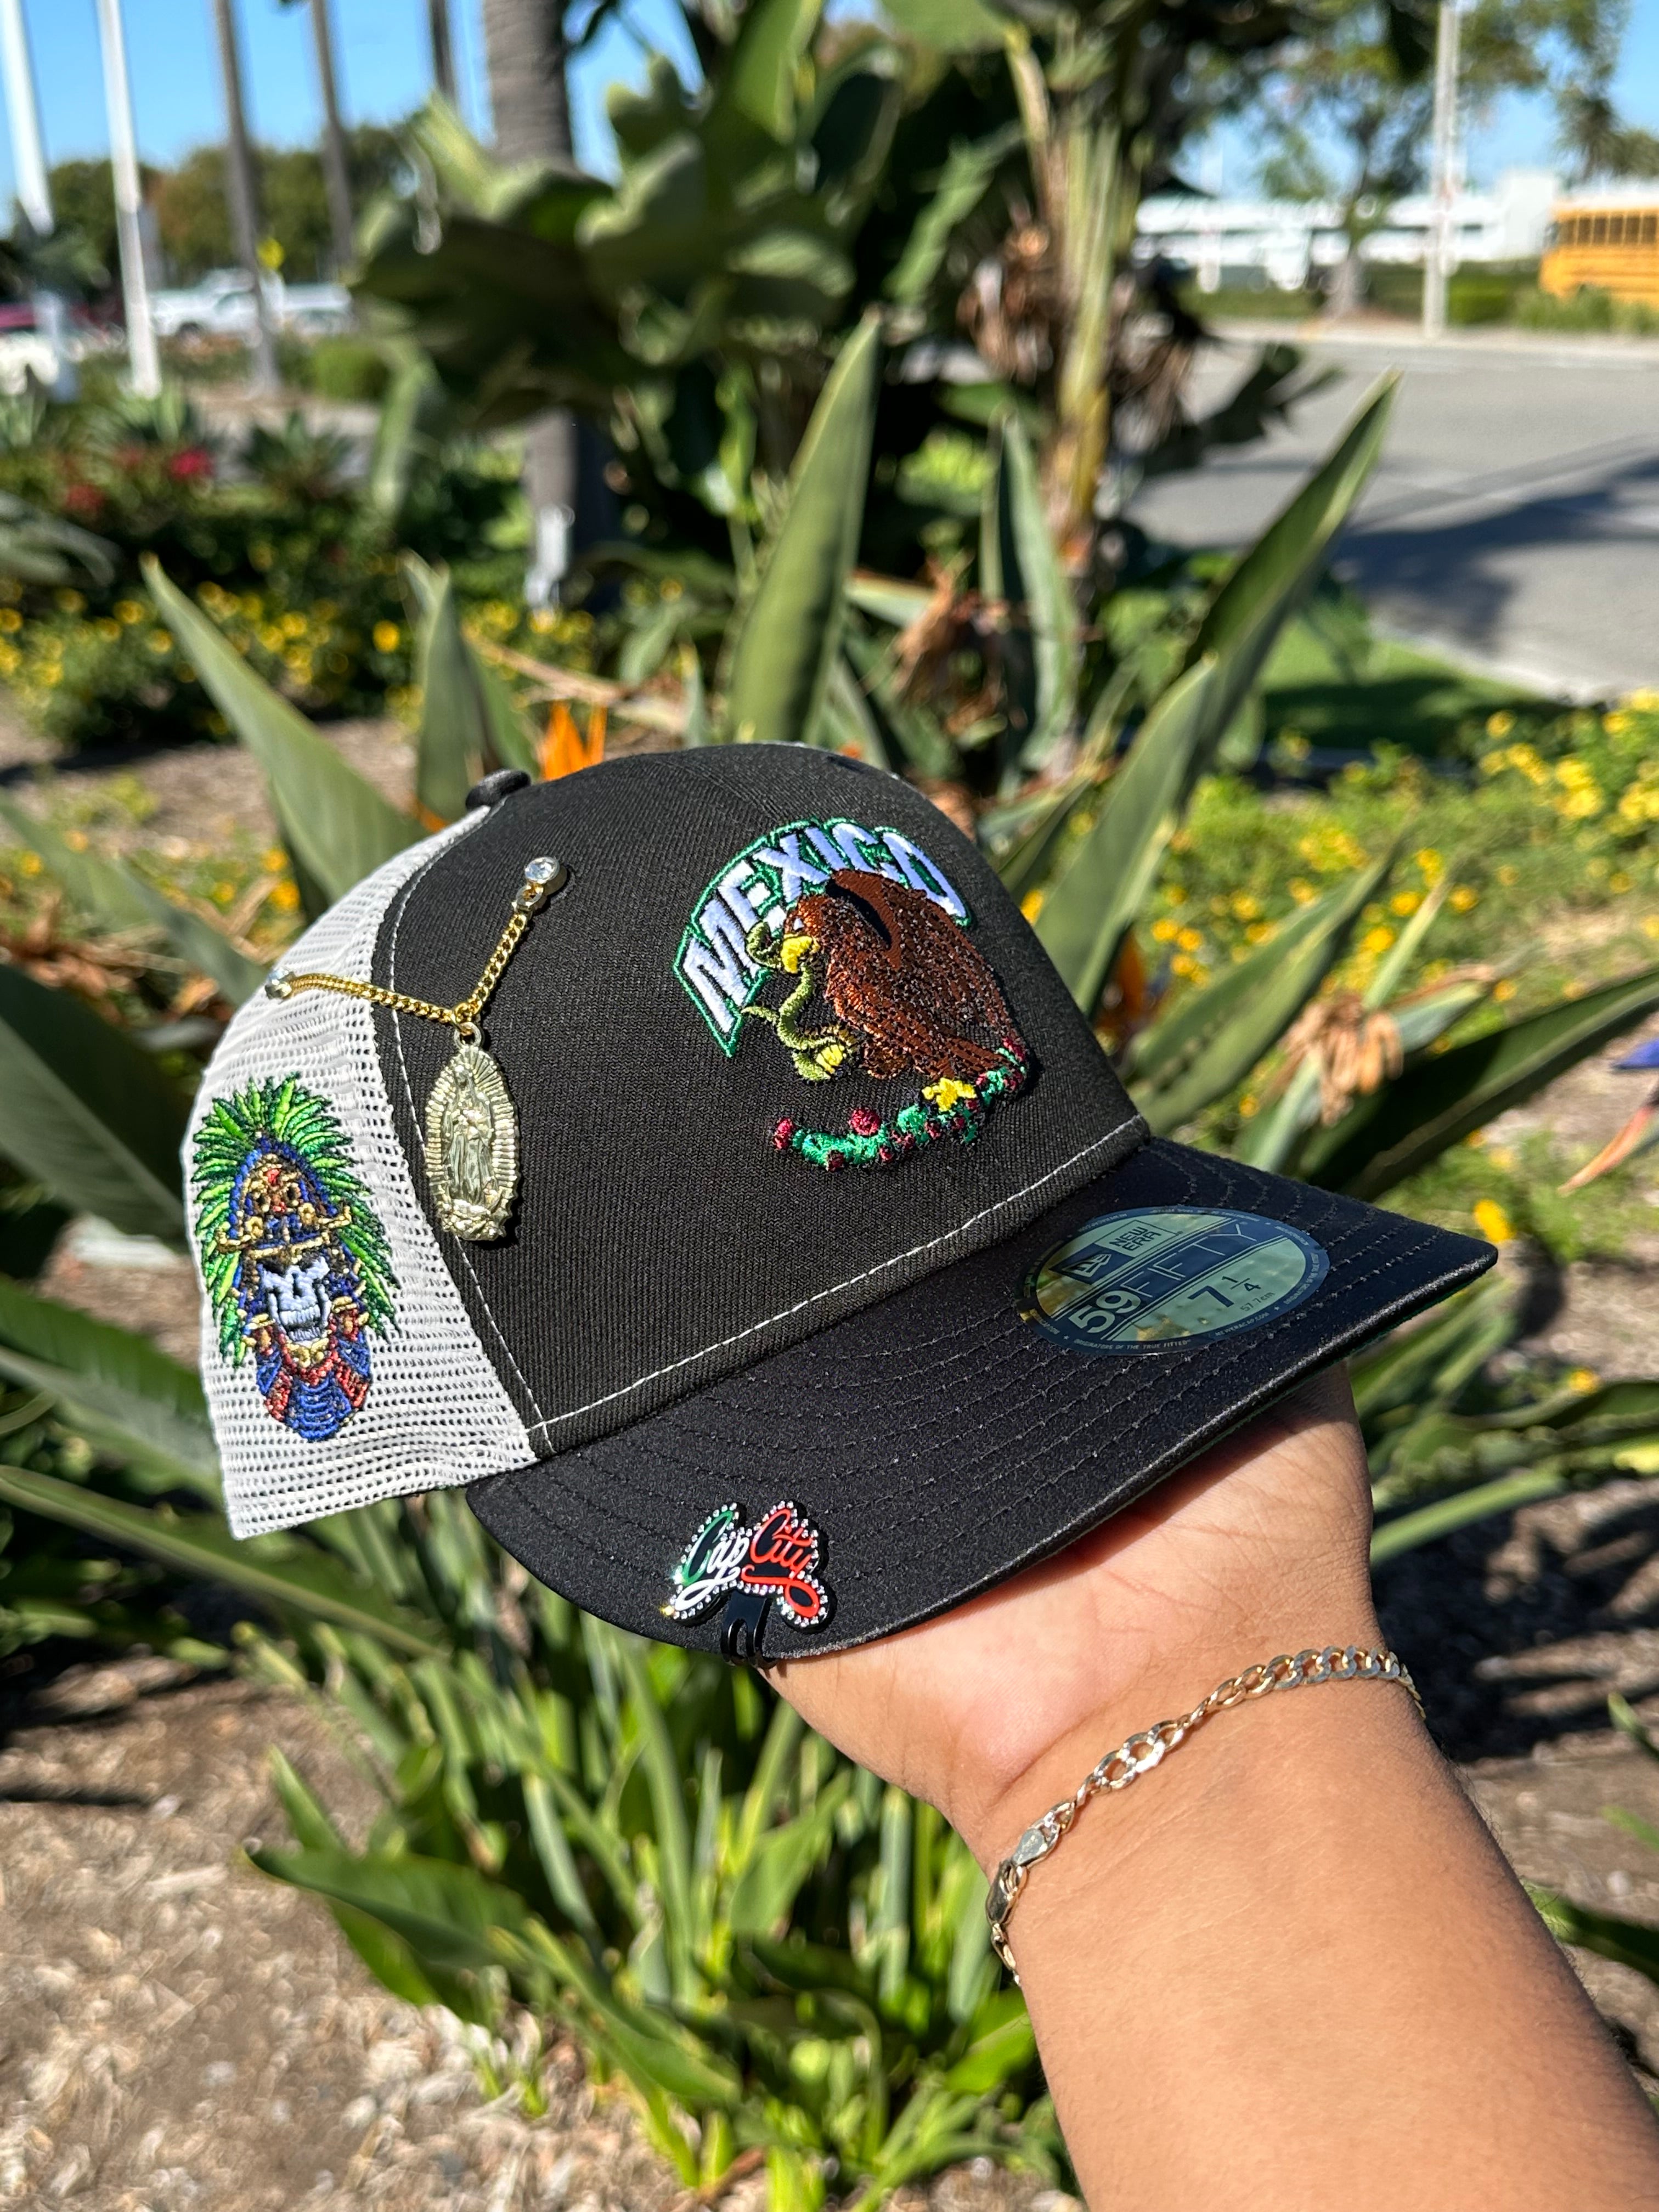 NEW ERA EXCLUSIVE 59FIFTY BLACK/SATIN "MEXICO" MESHBACK W/ AZTEC WARRIOR SIDE PATCH